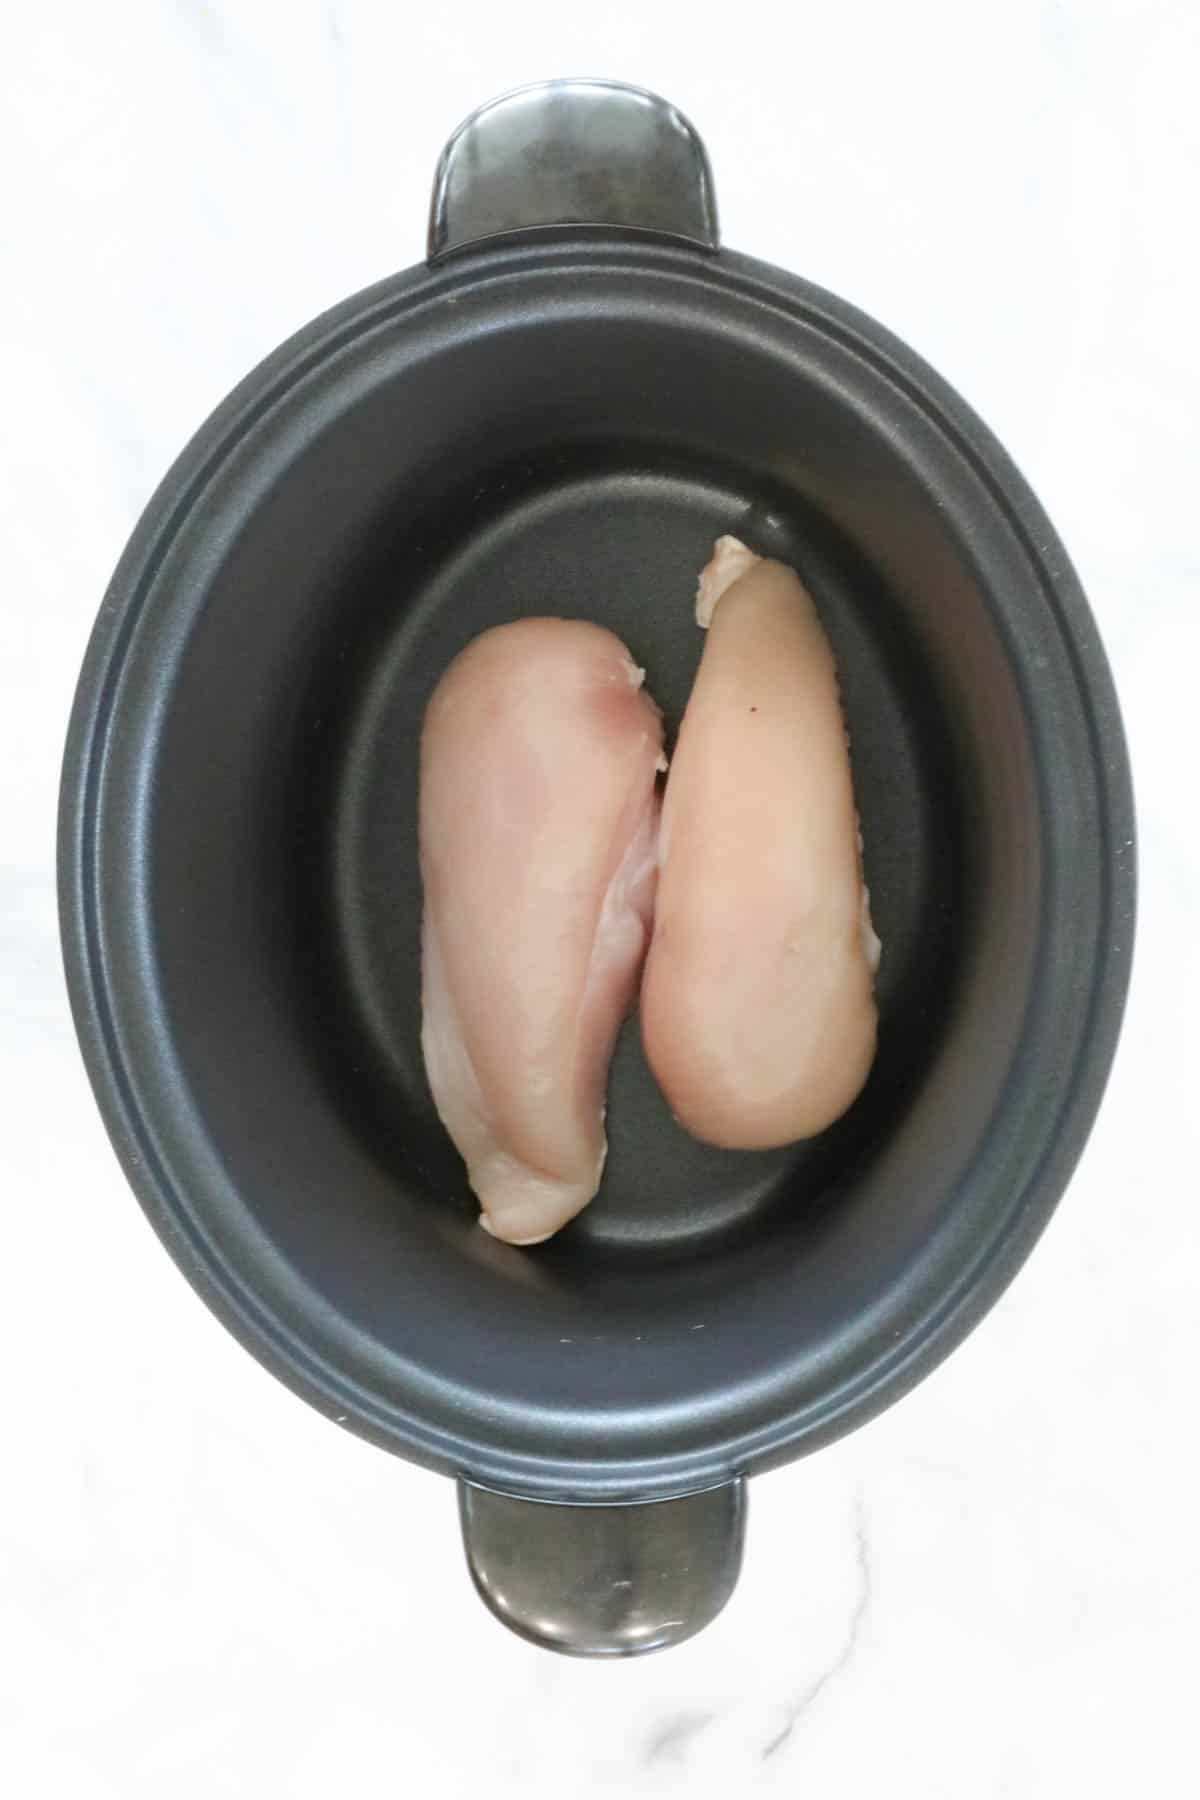 Two chicken breasts placed in a crock pot.